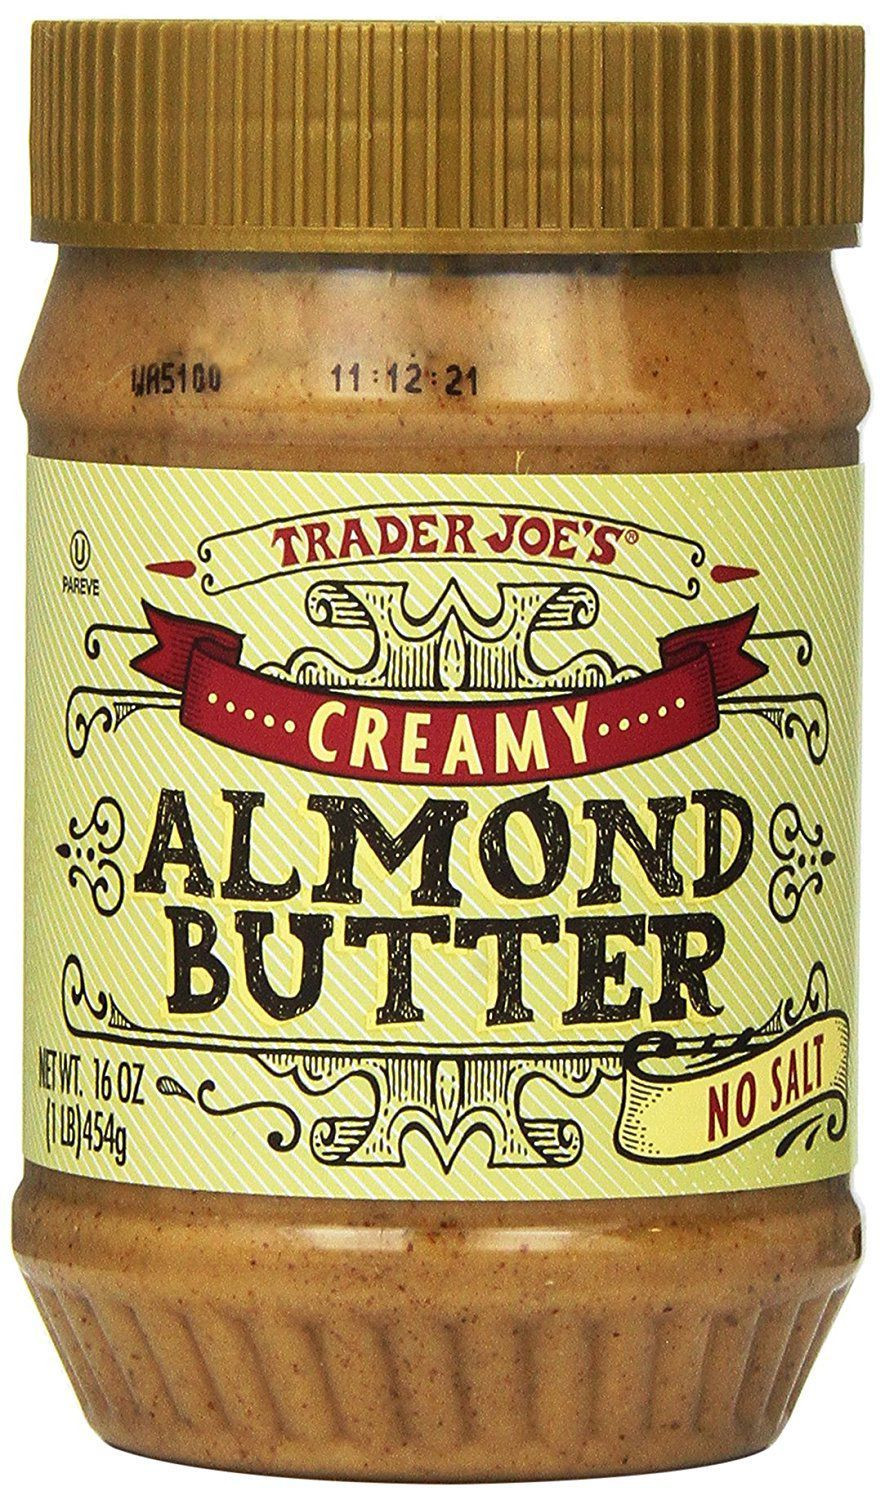 Low Calorie Desserts You Can Buy
 15 Keto Friendly Foods You Can Buy At Trader Joe s